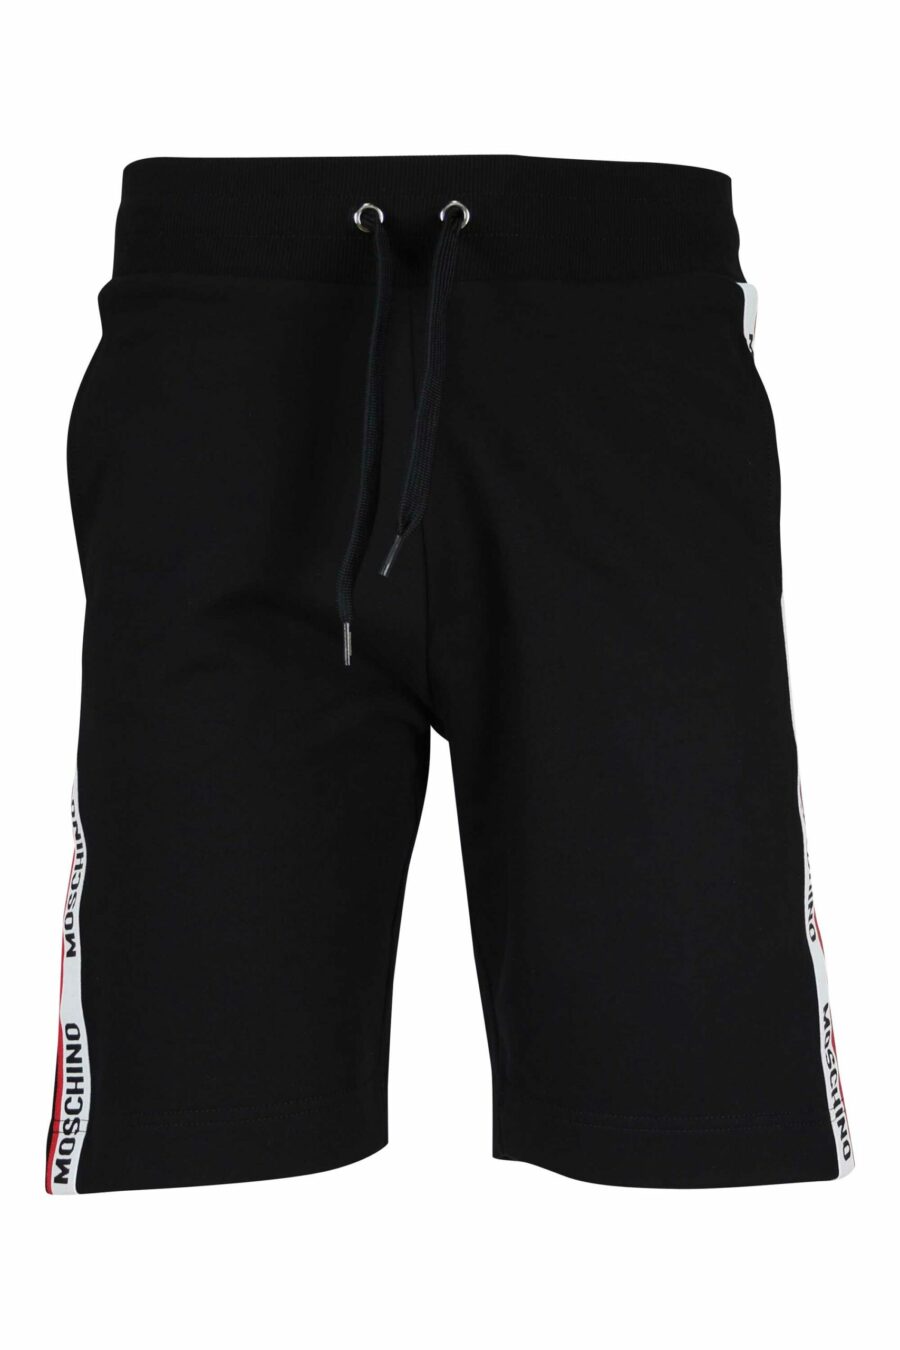 Tracksuit bottoms black with logo on vertical tape - 667113624945 scaled